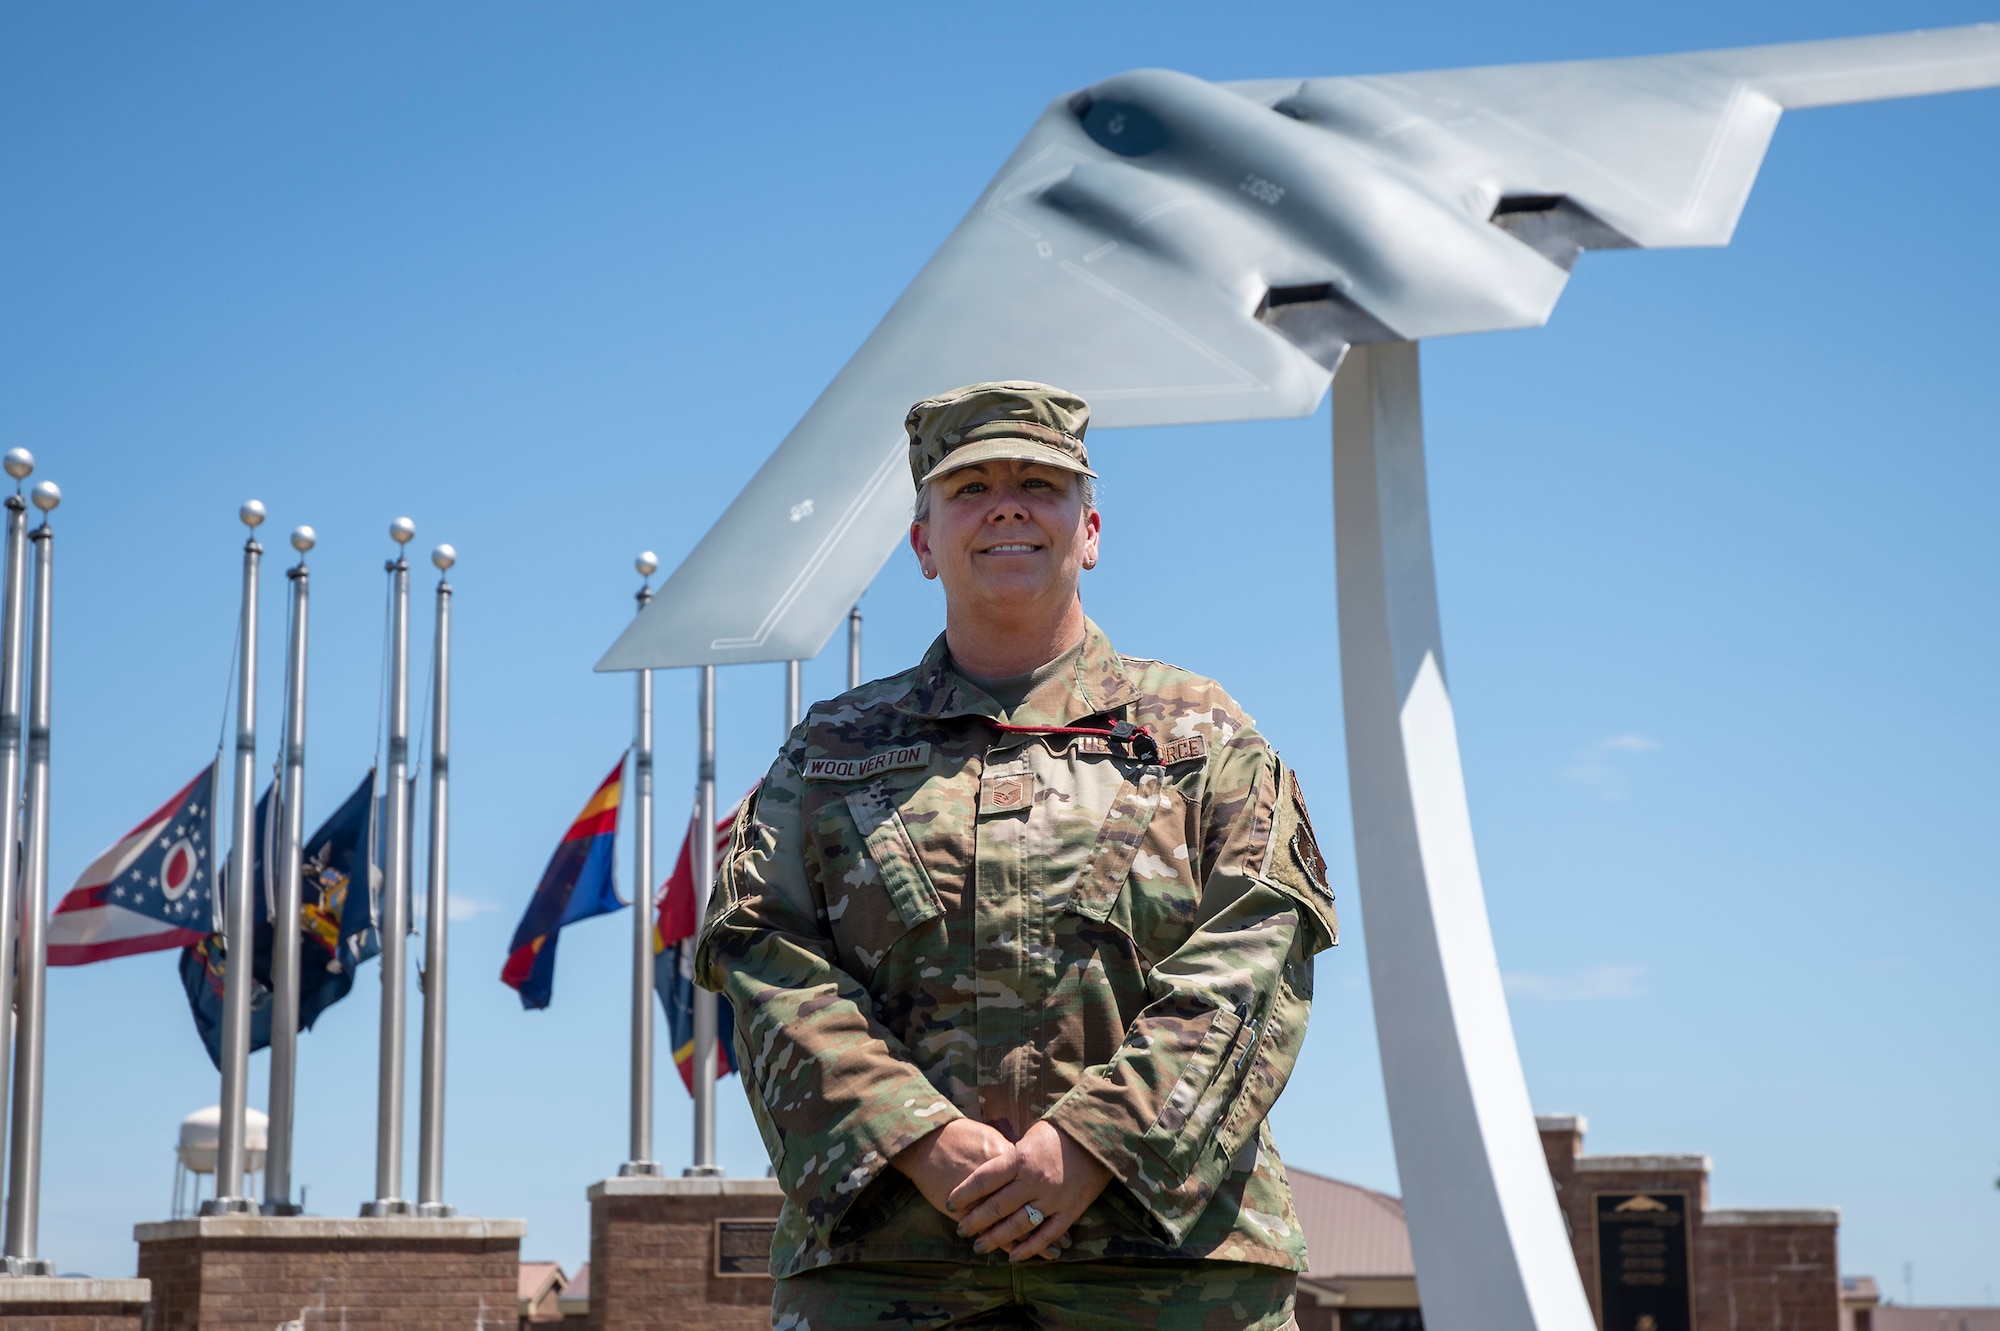 Master Sgt. Ashlea Woolverton, 131st Bomb Wing command post superintendent, poses for a photo at Whiteman Air Force Base, Missouri, May 14, 2023. Woolverton responded to a traffic accident on the way to work in December 2022, using basic Air Force medical training to save the life of another person. (U.S. Air National Guard photo by Senior Airman Kelly Ferguson)